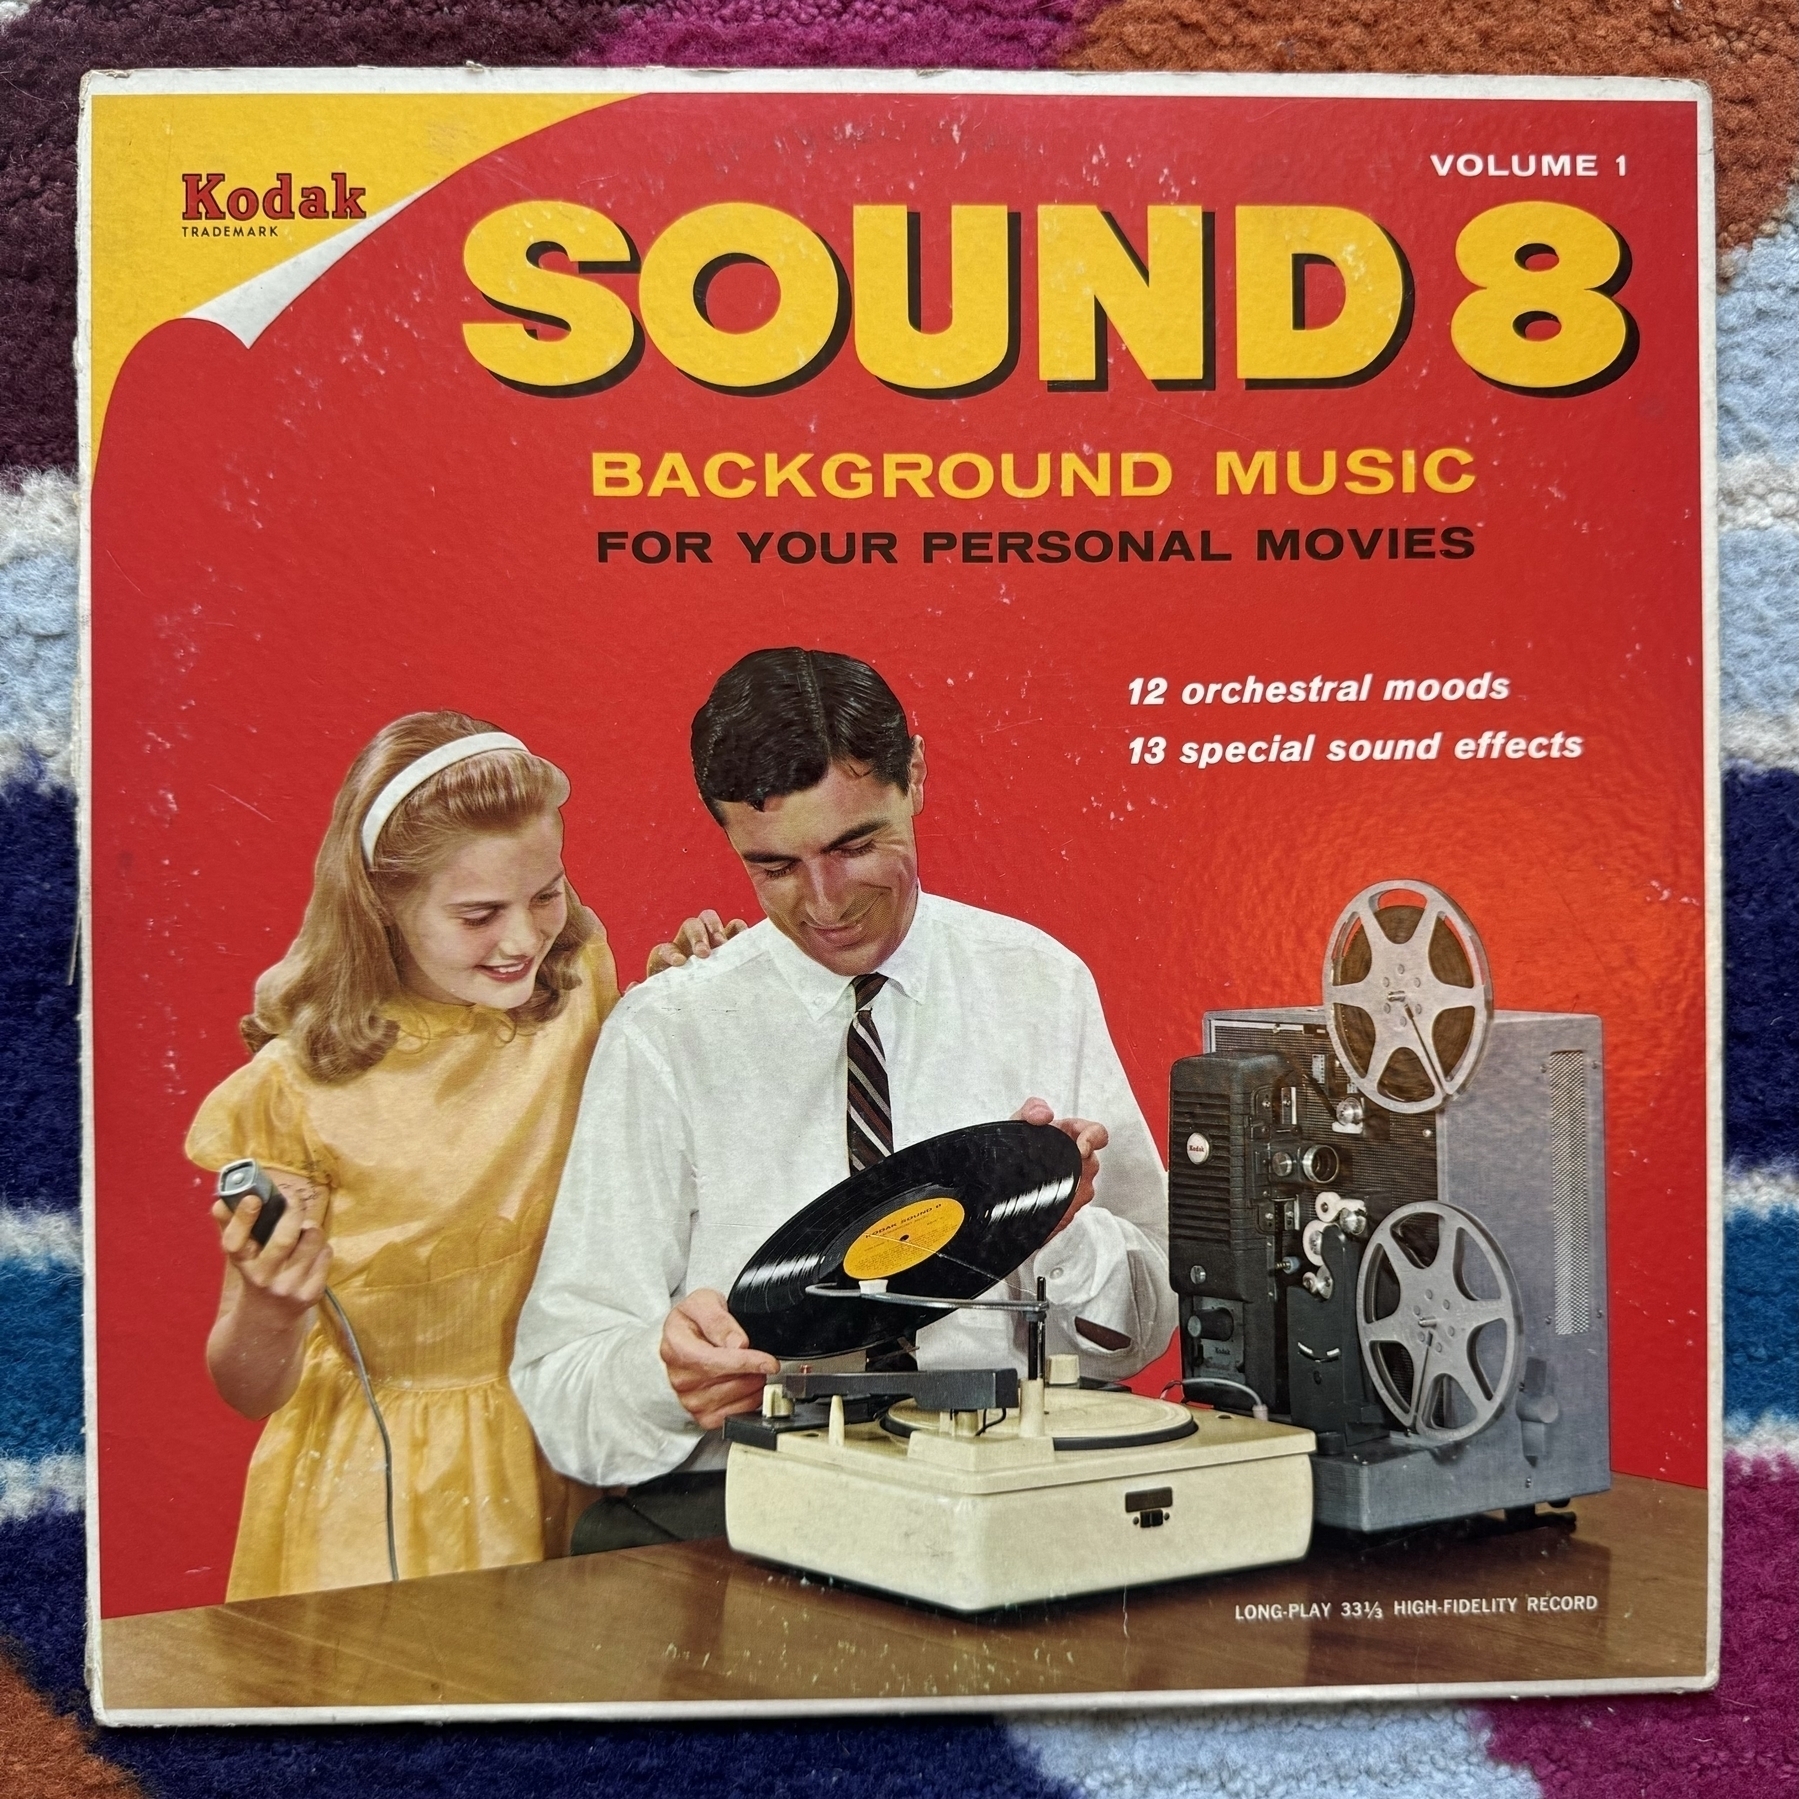 A vintage LP from Kodak called Sound: Background Music for your personal movies. It includes 12 orchestral moods and 13 sound effects.